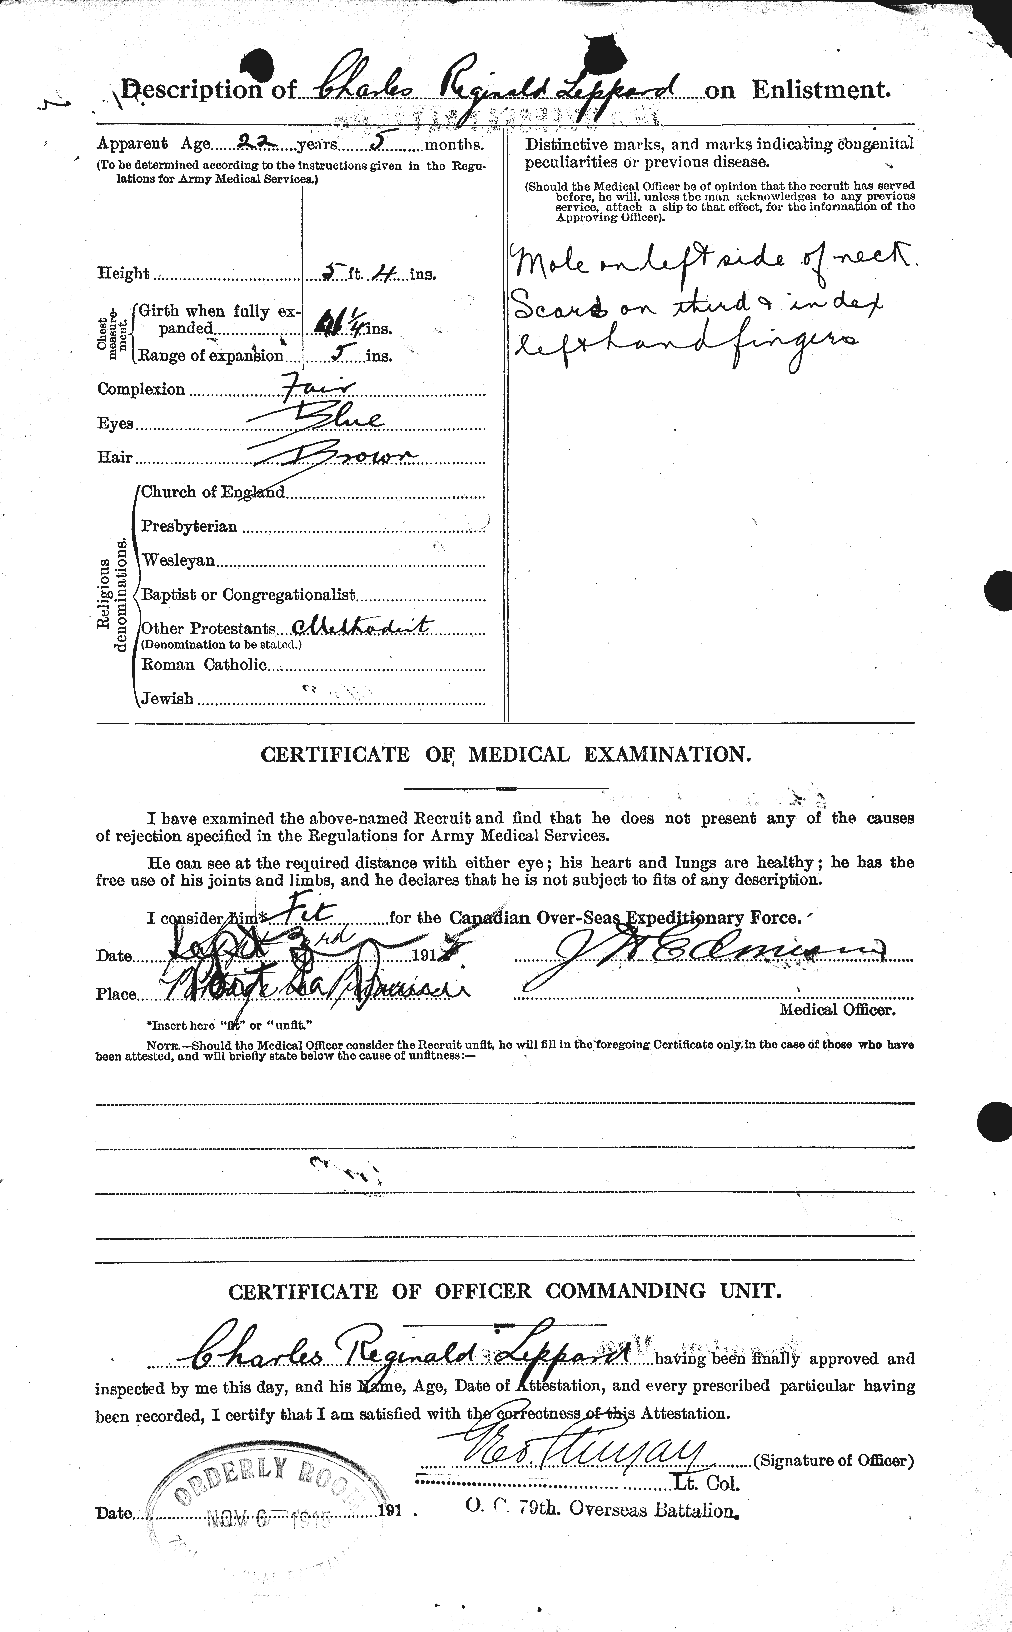 Personnel Records of the First World War - CEF 462980b